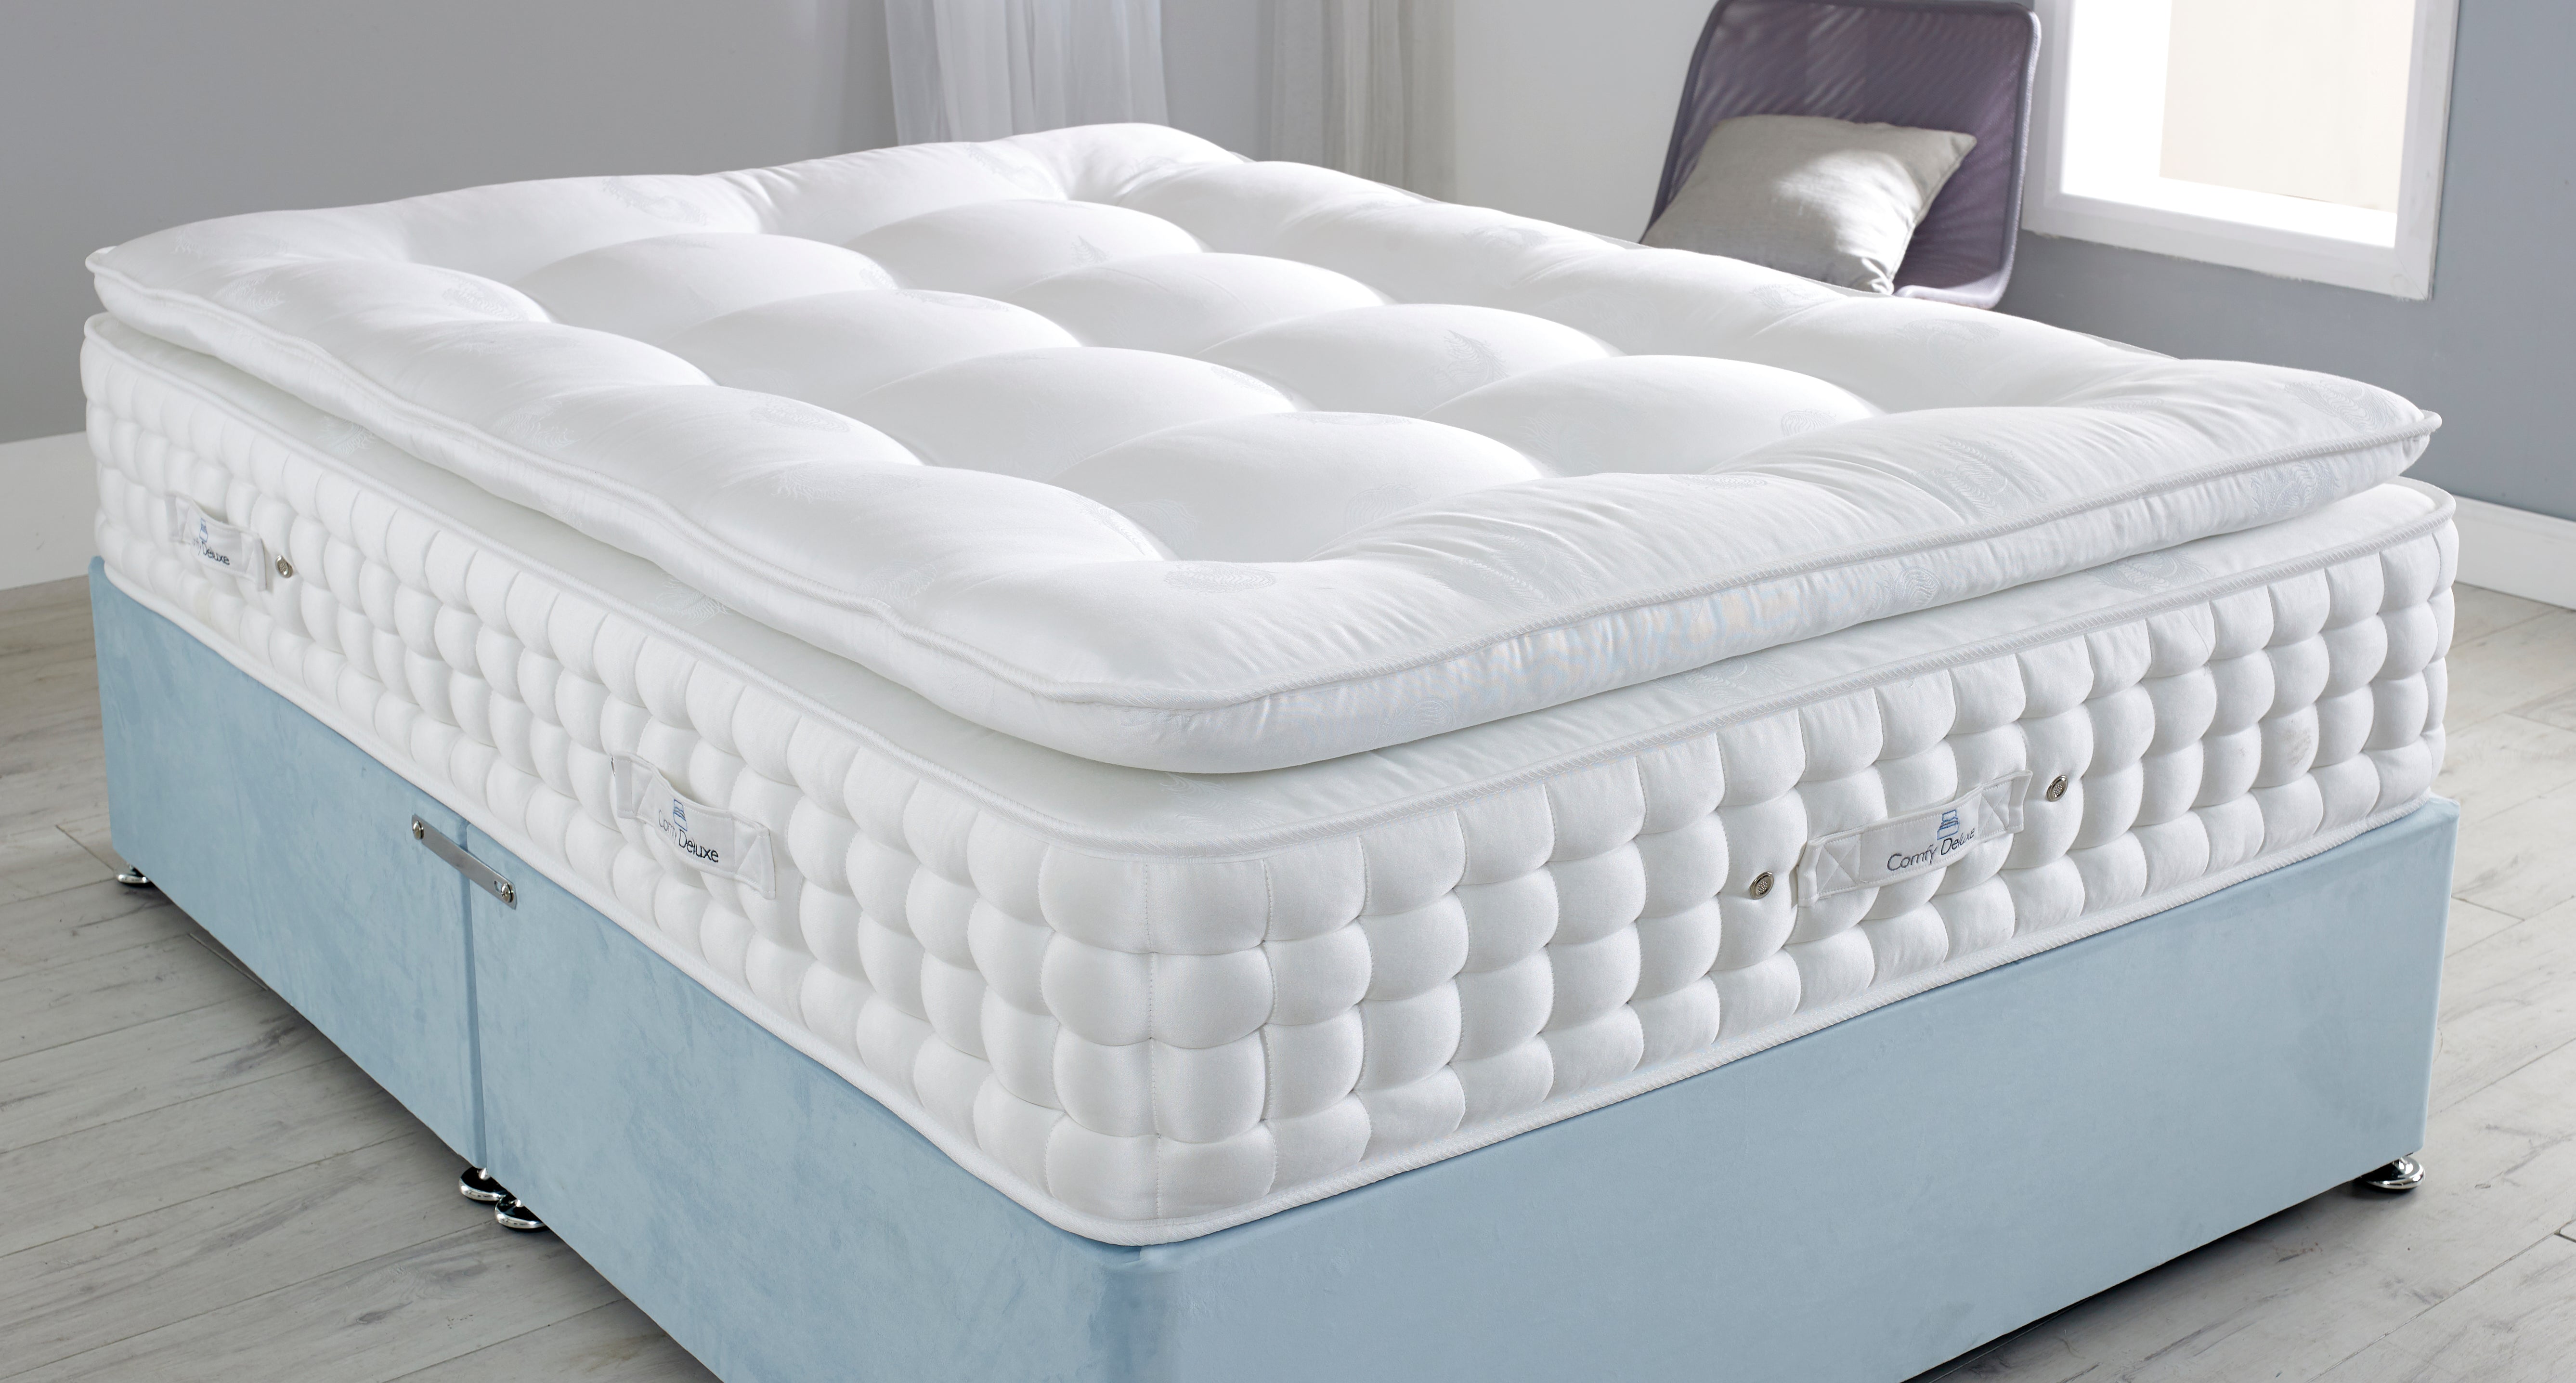 mattress tops with small clouds stitched in